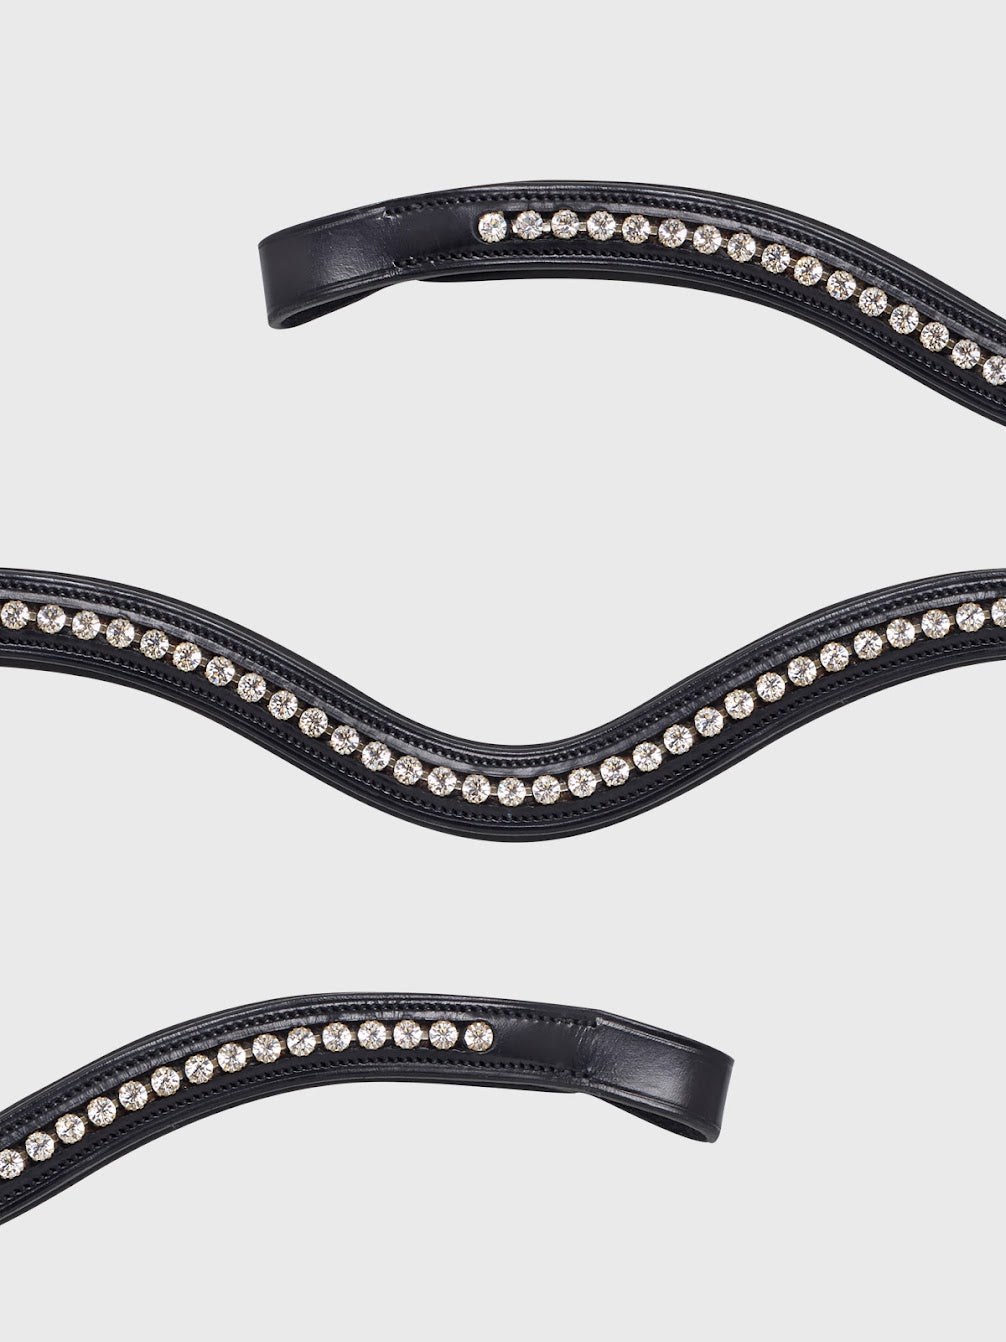 The Equiline U shaped browband embellished with diamantés. These crystals are inset so won’t catch on anything and add the perfect sparkle to your horses bridle. The shape offers movement and optimum comfort for your horse and is made with soft and supple Italian leather. 